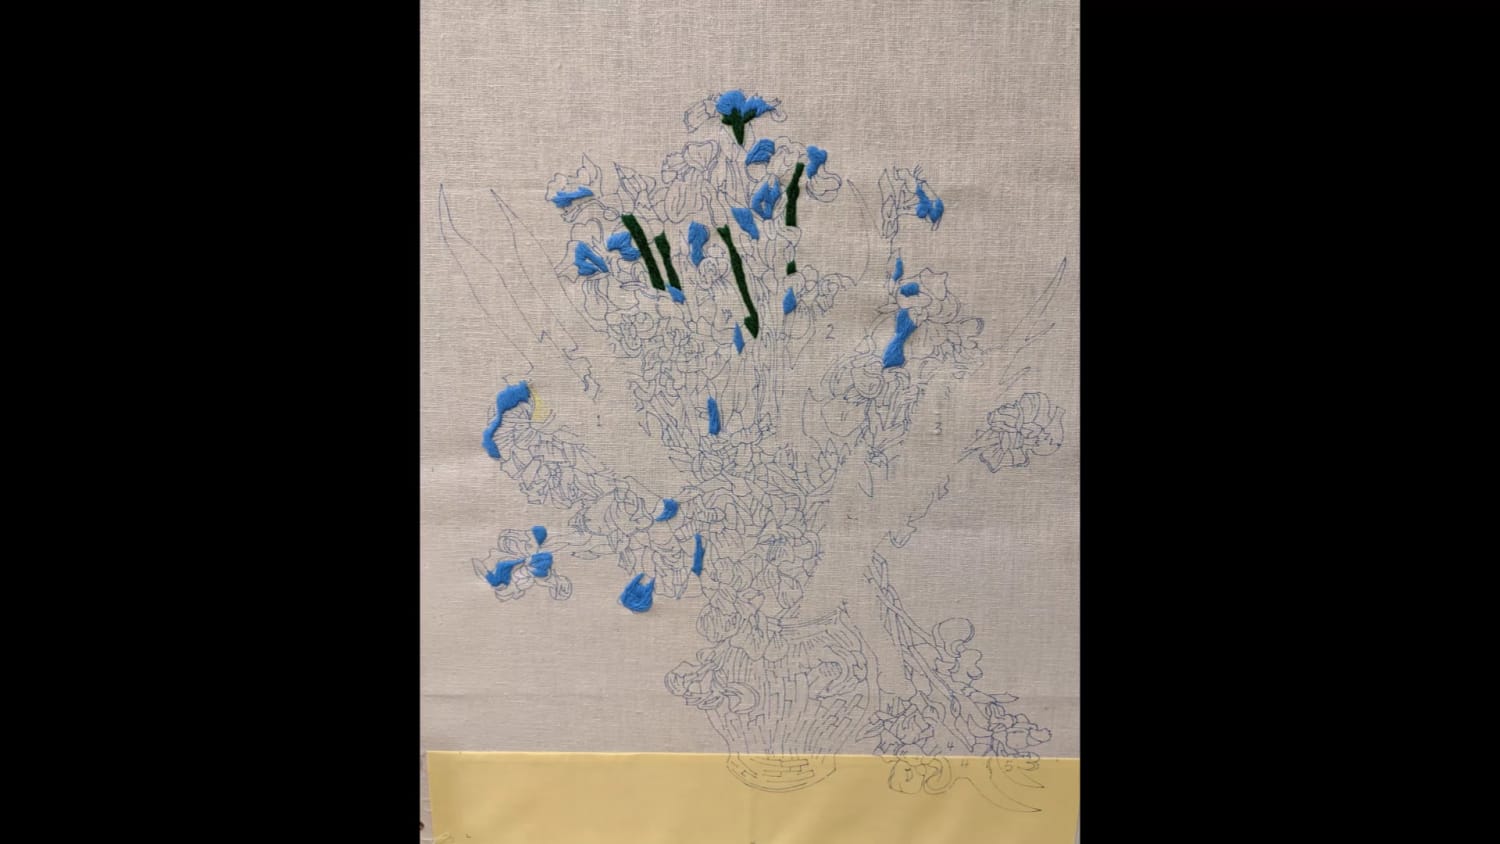 Van Gogh's Irises in a vase crewel embroidery. Time lapse courtesy of my son.